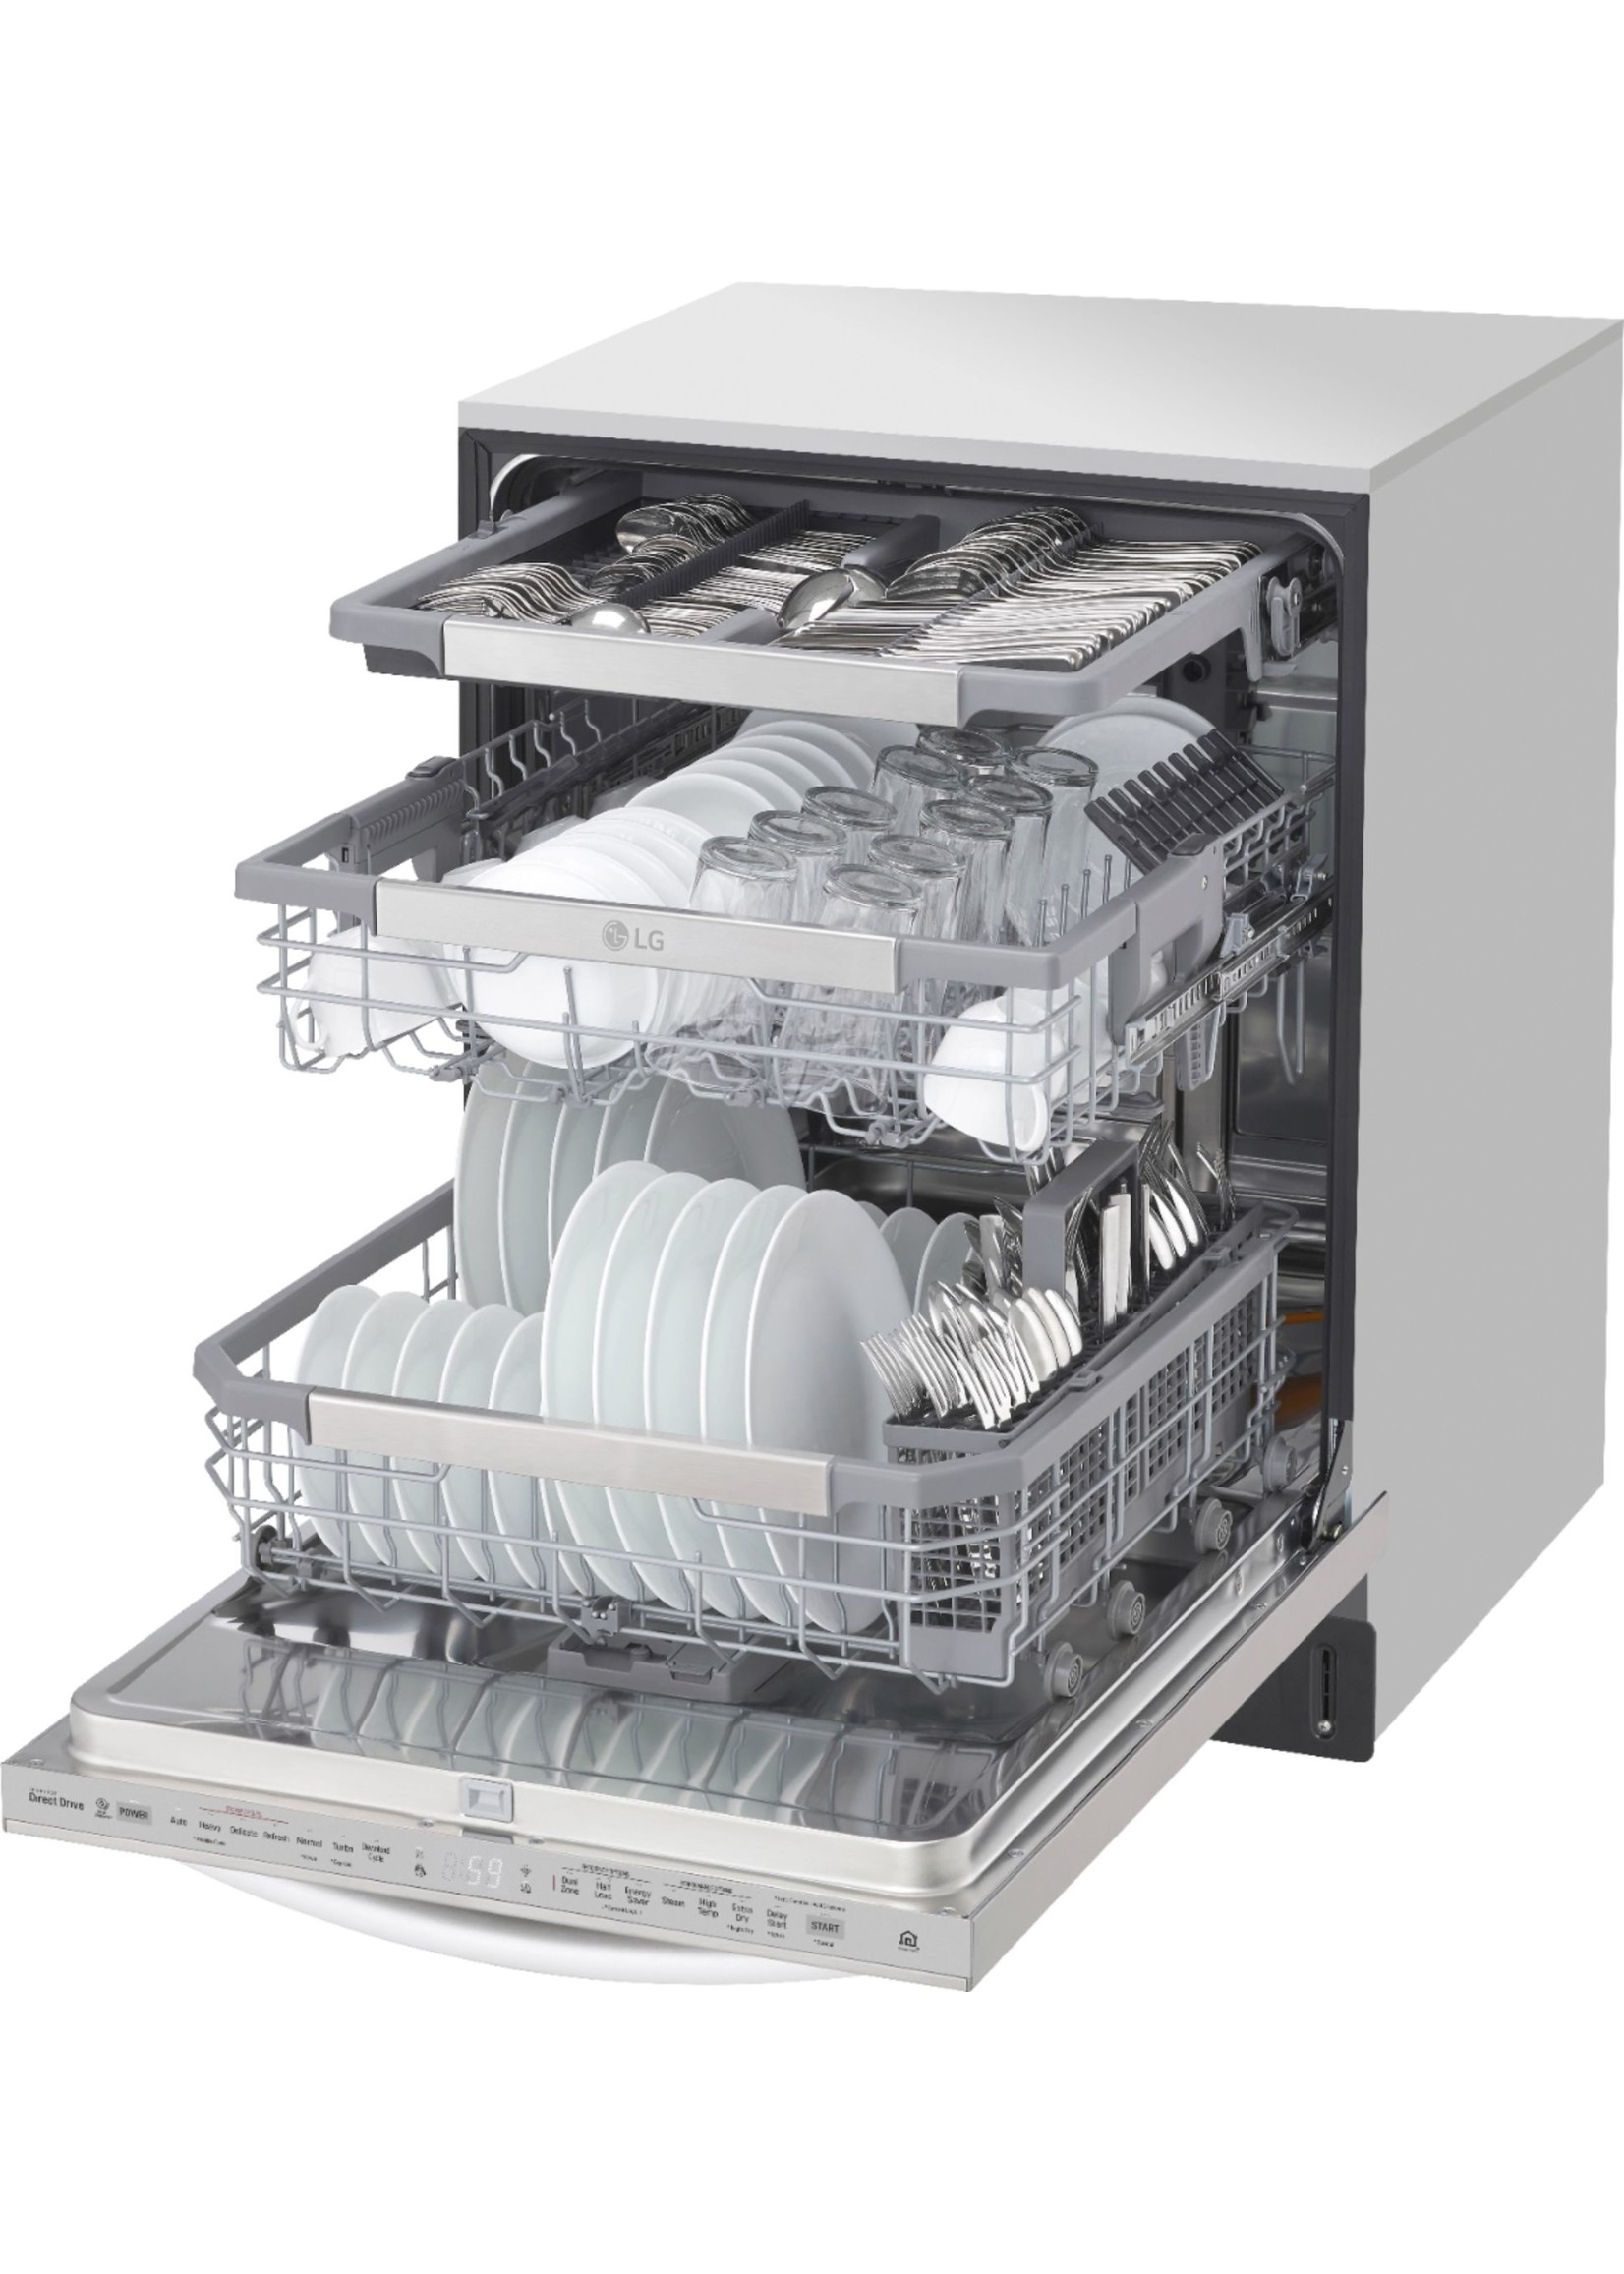 LG - 24" Top Control Smart Built-In Dishwasher with TrueSteam, Tub Light and Quiet Operation - Stainless steel